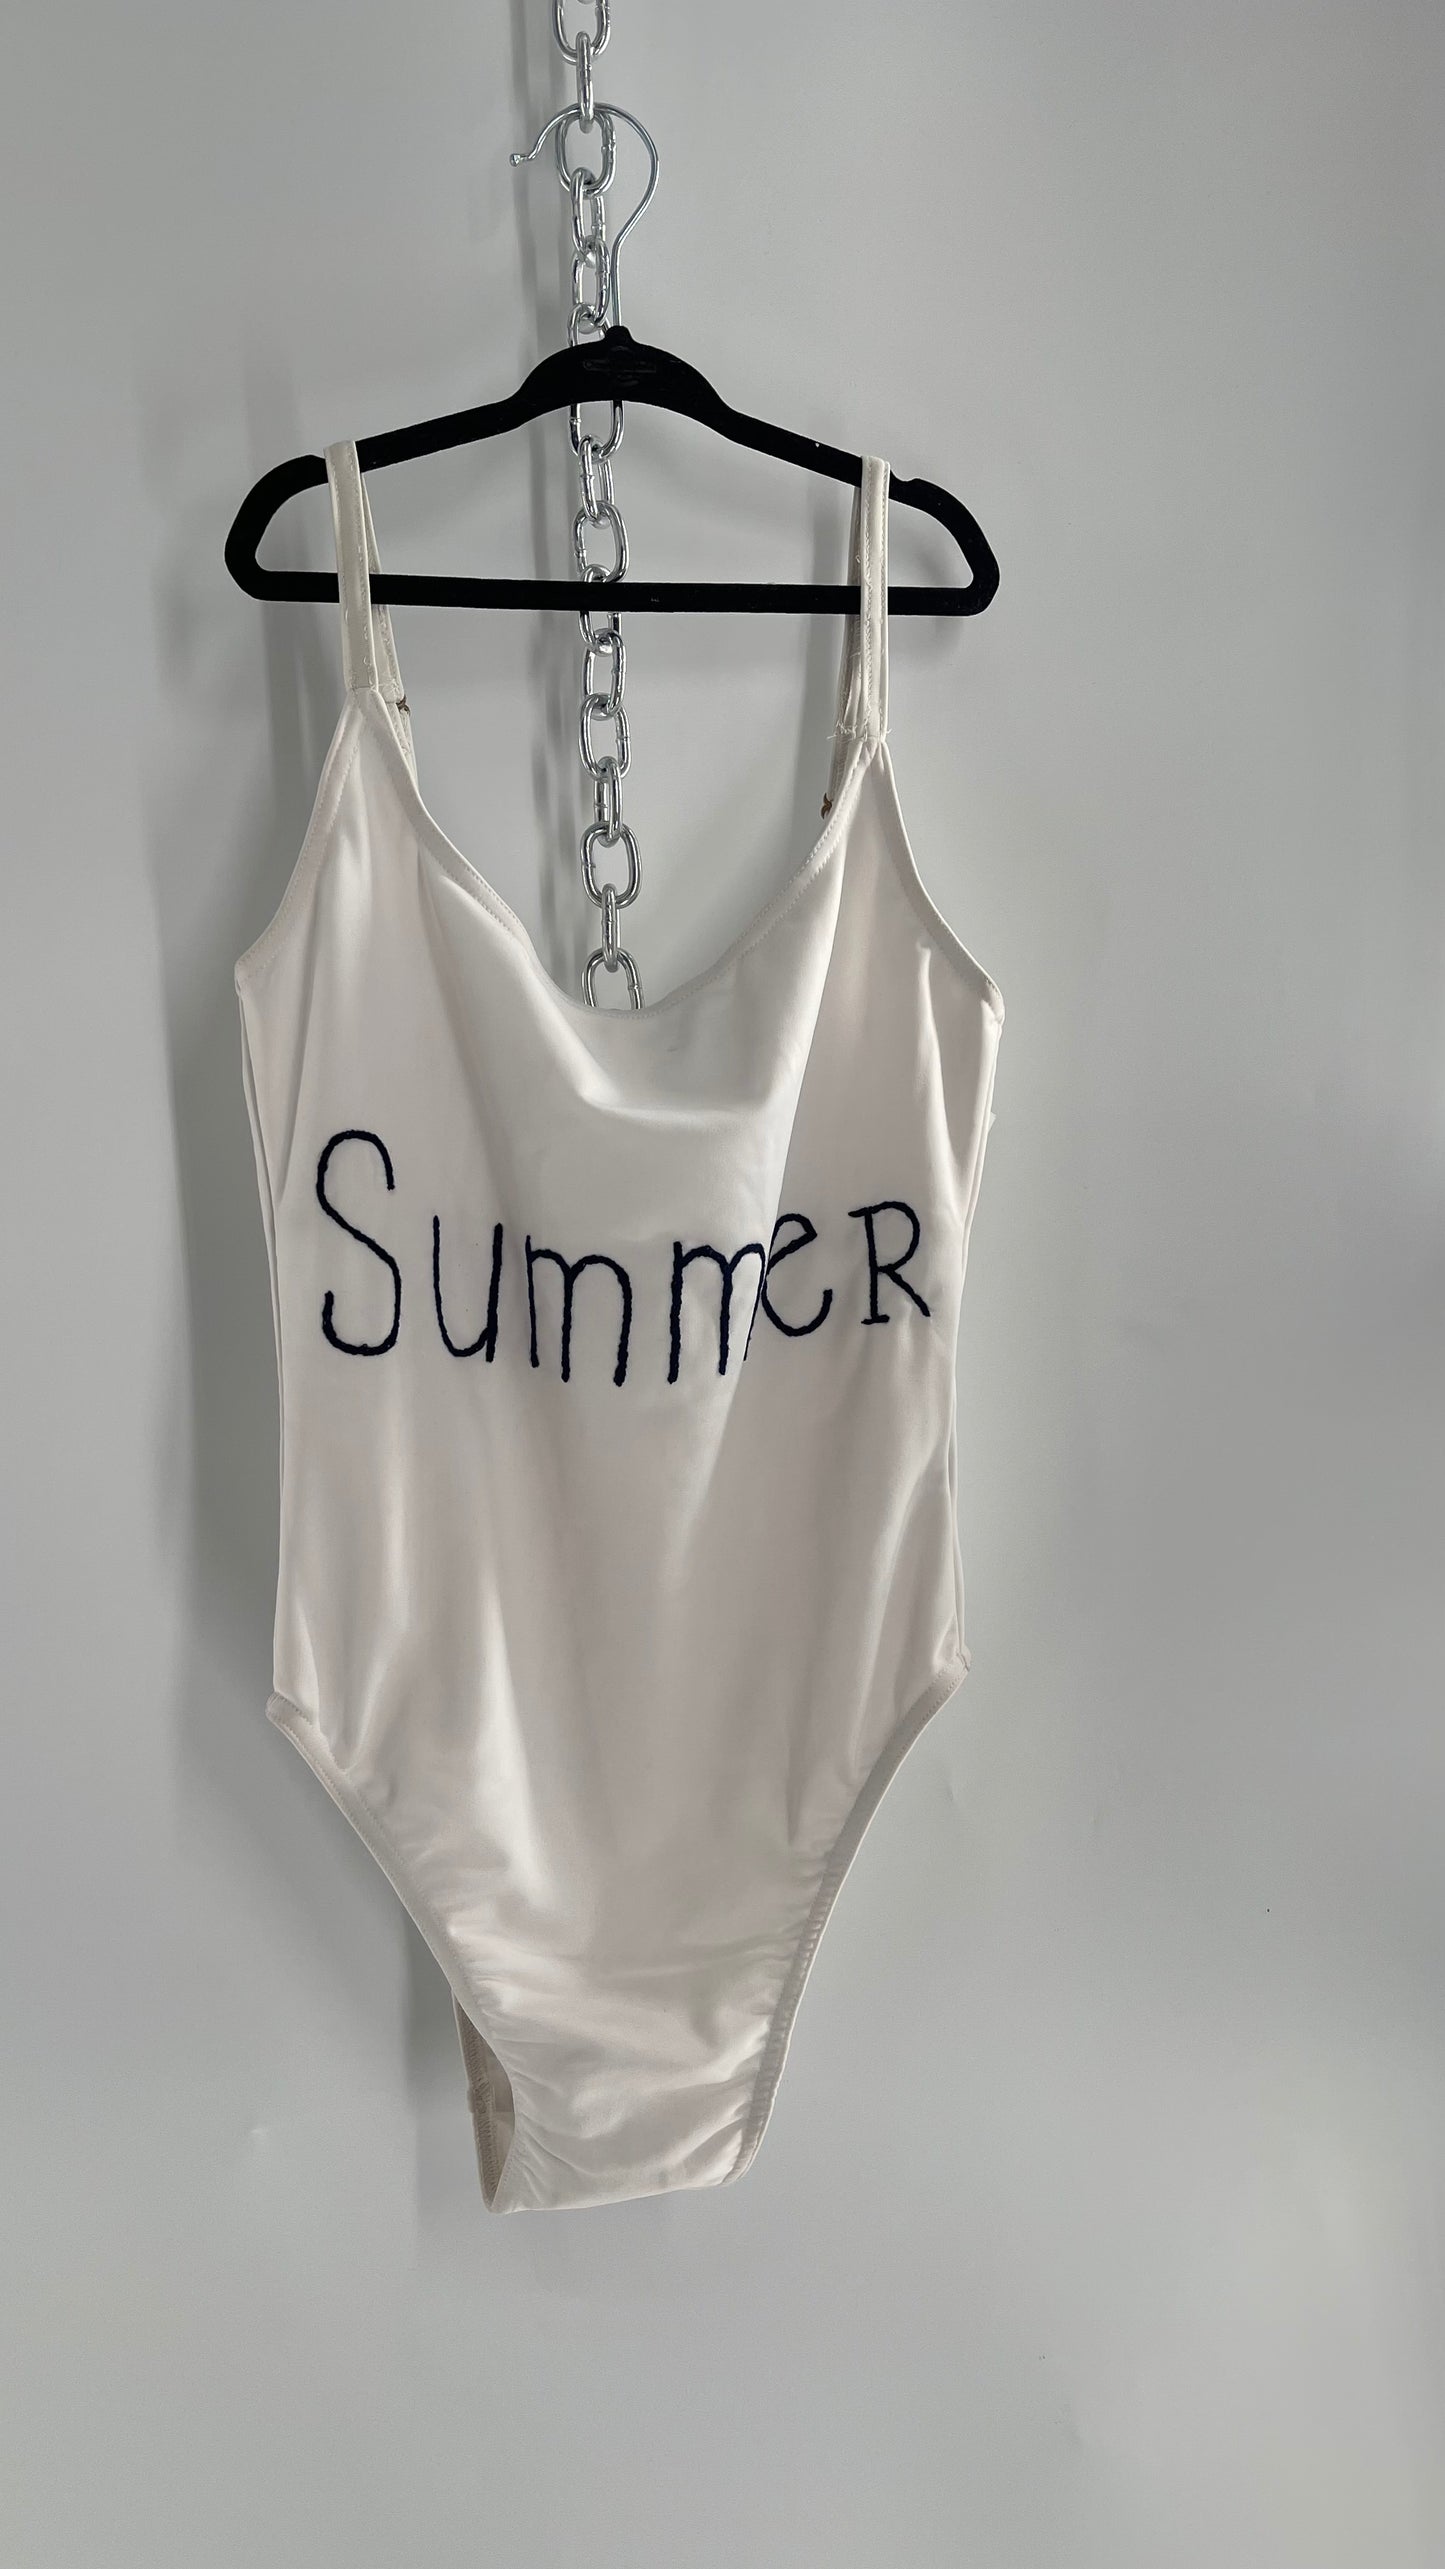 Bannerday White Bathing Suit with Black “Summer” Embroidery (Small)